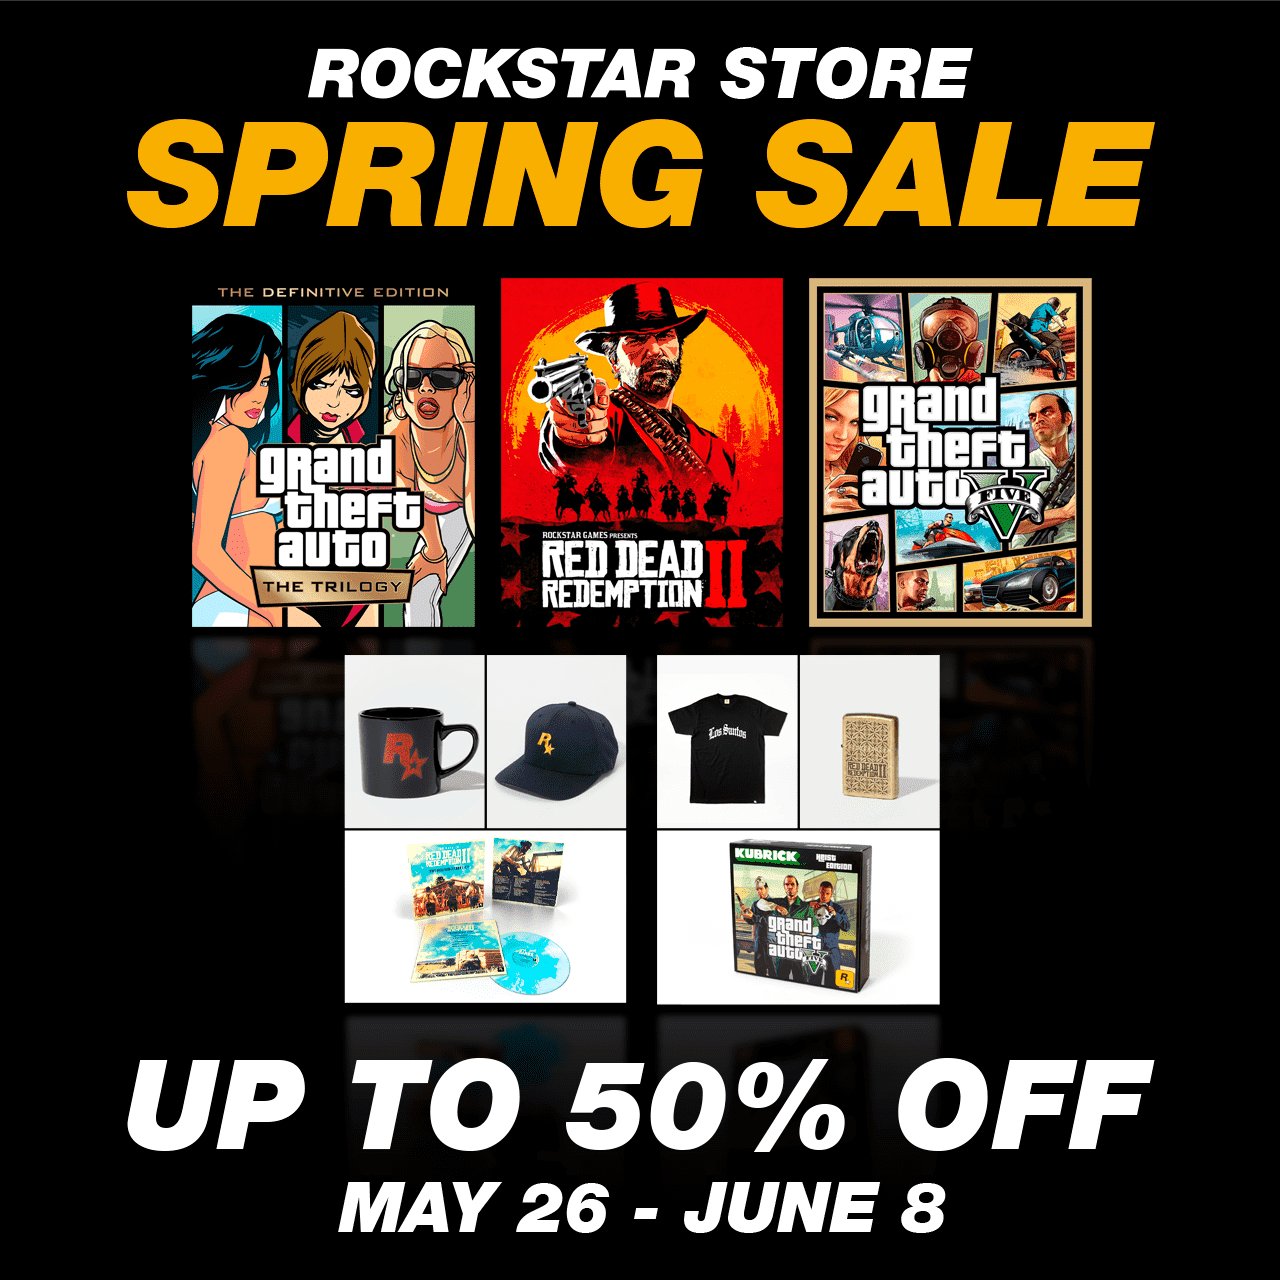 Rockstar Store Spring Sale - Up to 50% Off - May 26 till June 8